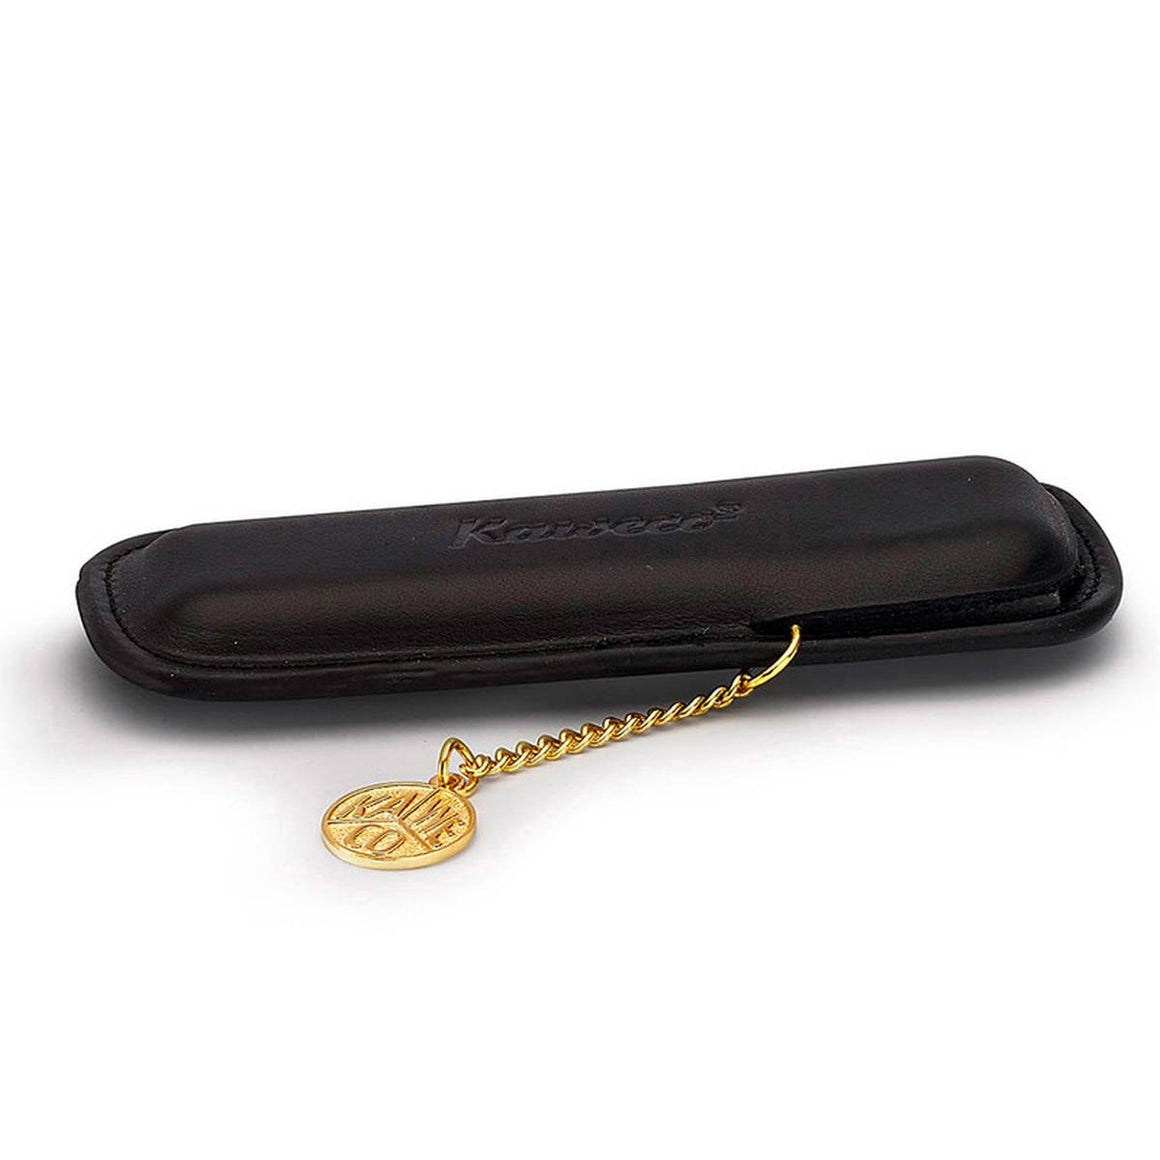 A gold chain with a round 'Kaweco' logo pendant is attached from the slit of the leather black narrow pouch.